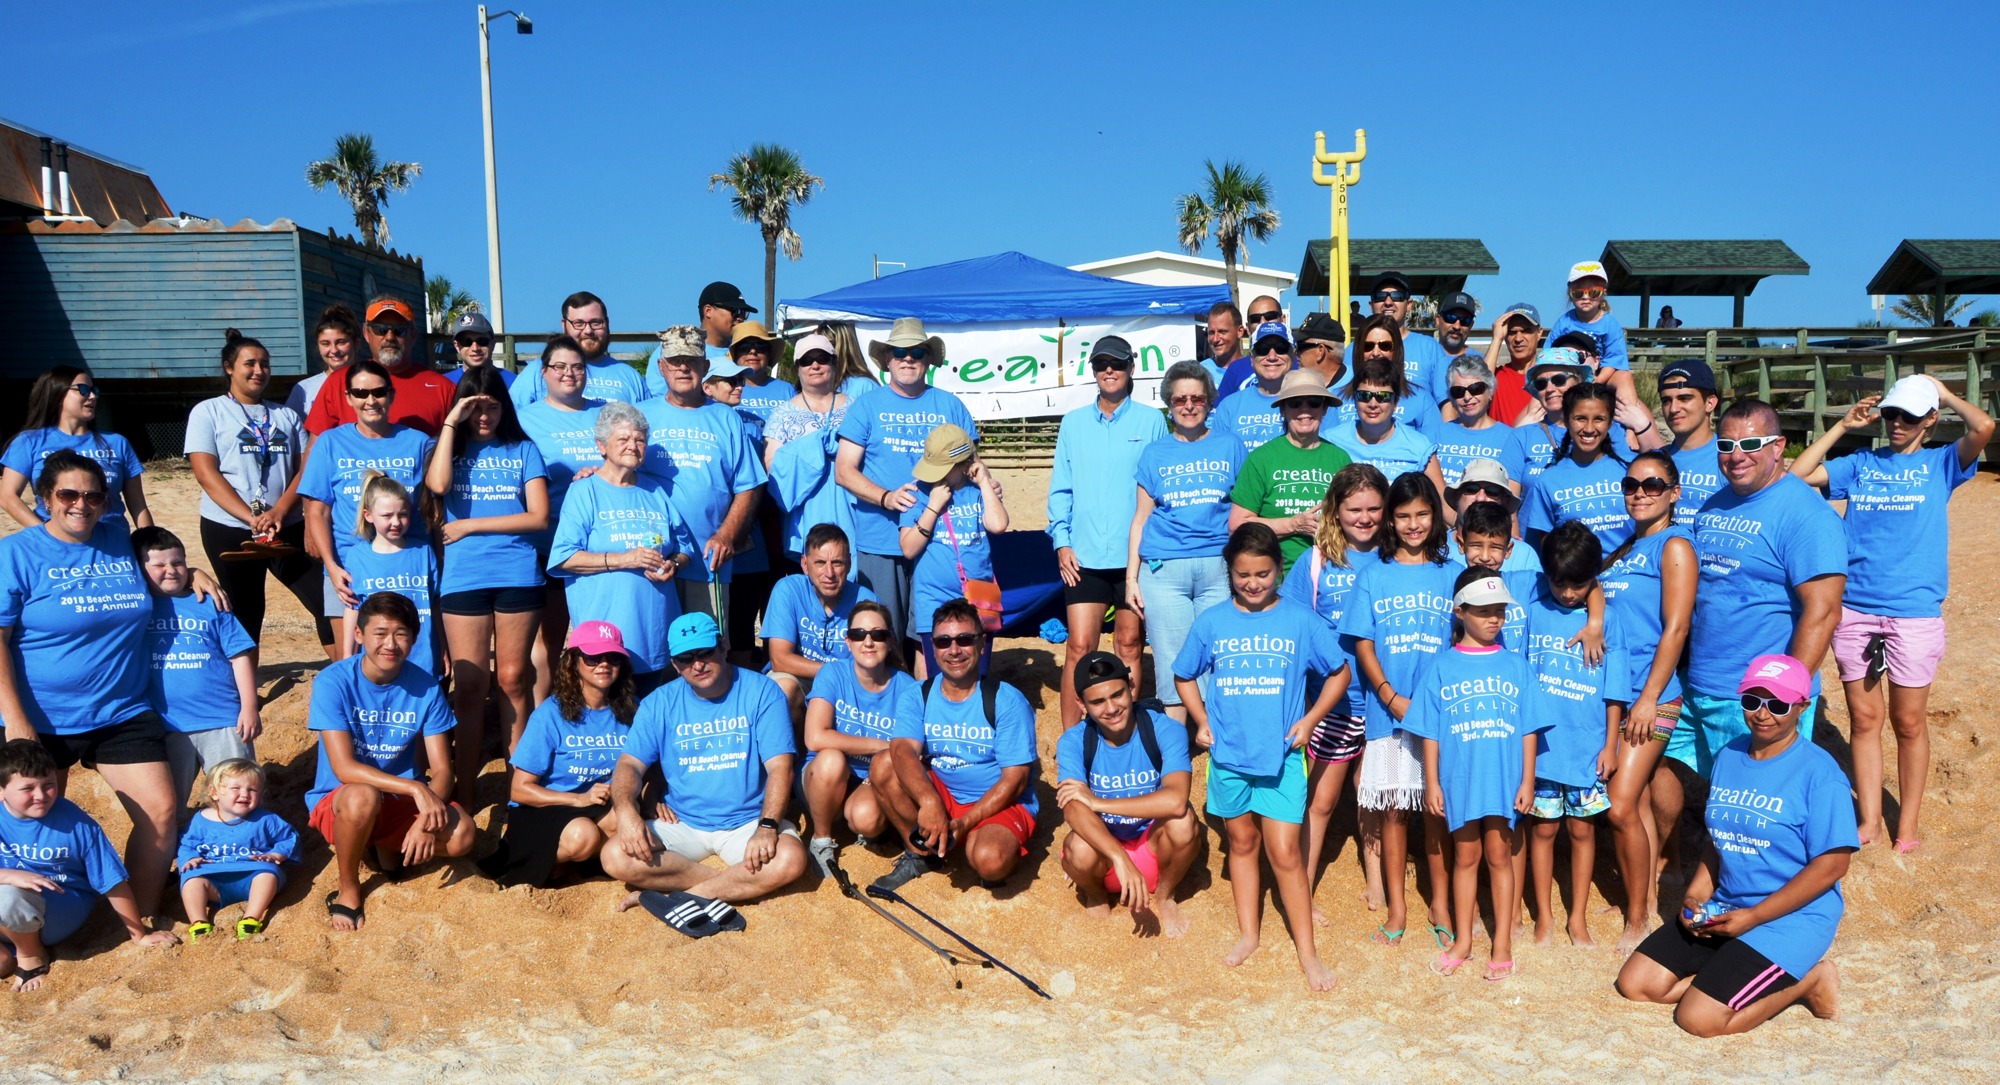 Nearly 100 volunteers joined Florida Hospital Flagler for a beach clean-up along Flagler Beach on June 24. Photo courtesy of Lindsay Cashio